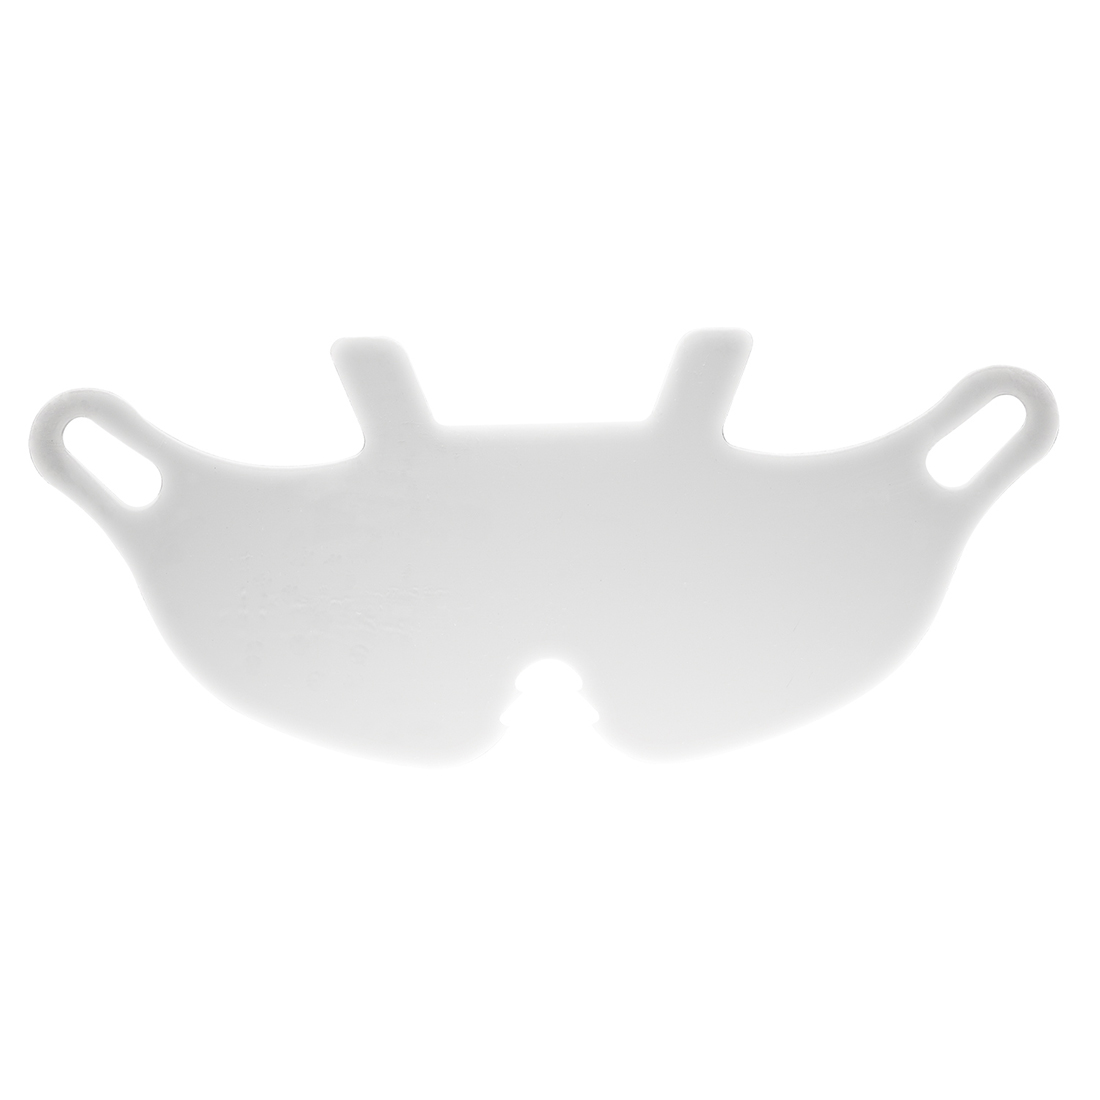 Endurance Visor Replacement - Clear